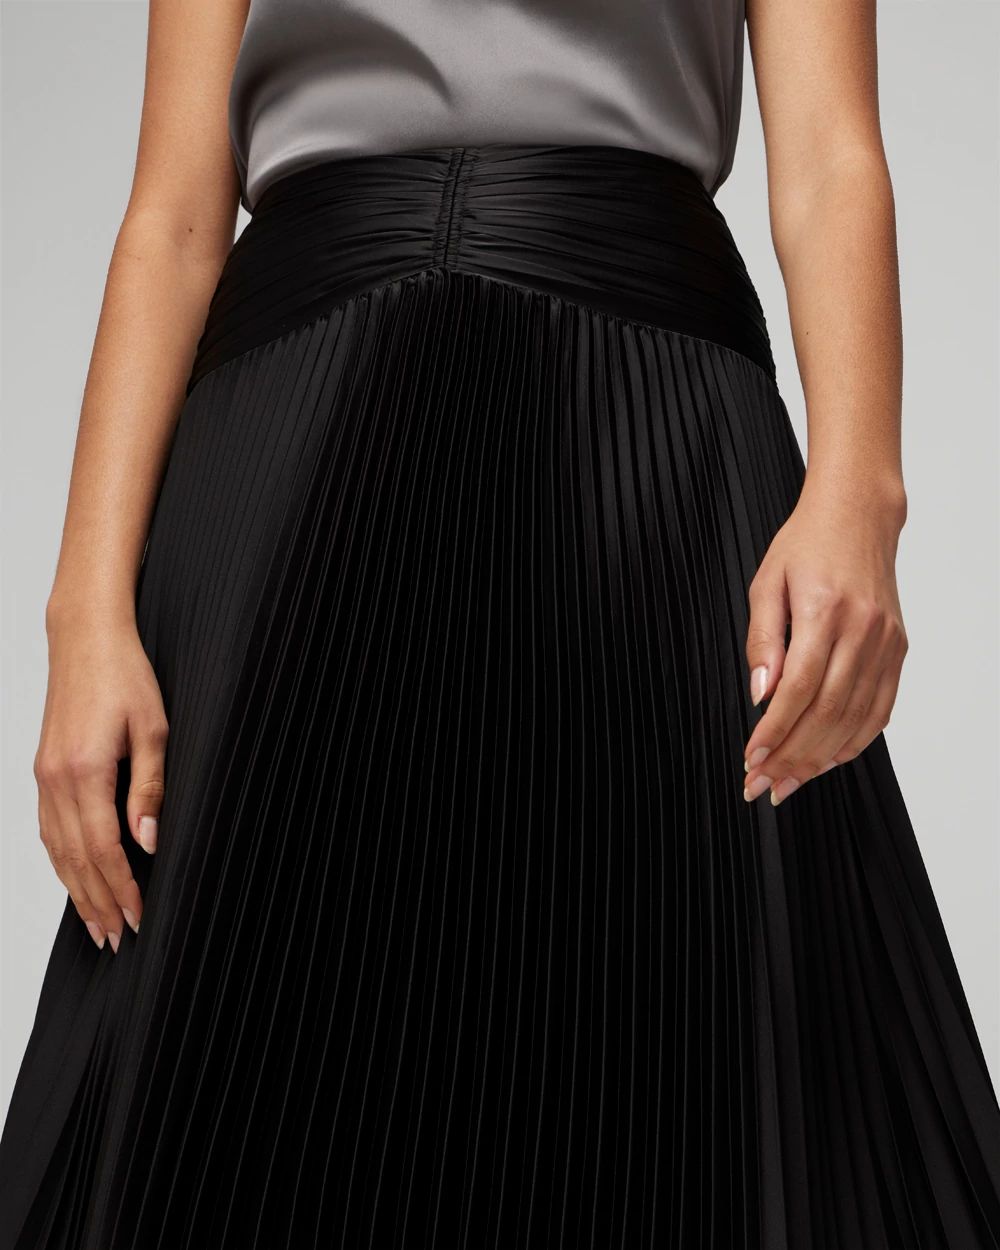 Satin Pleated Midi Skirt click to view larger image.